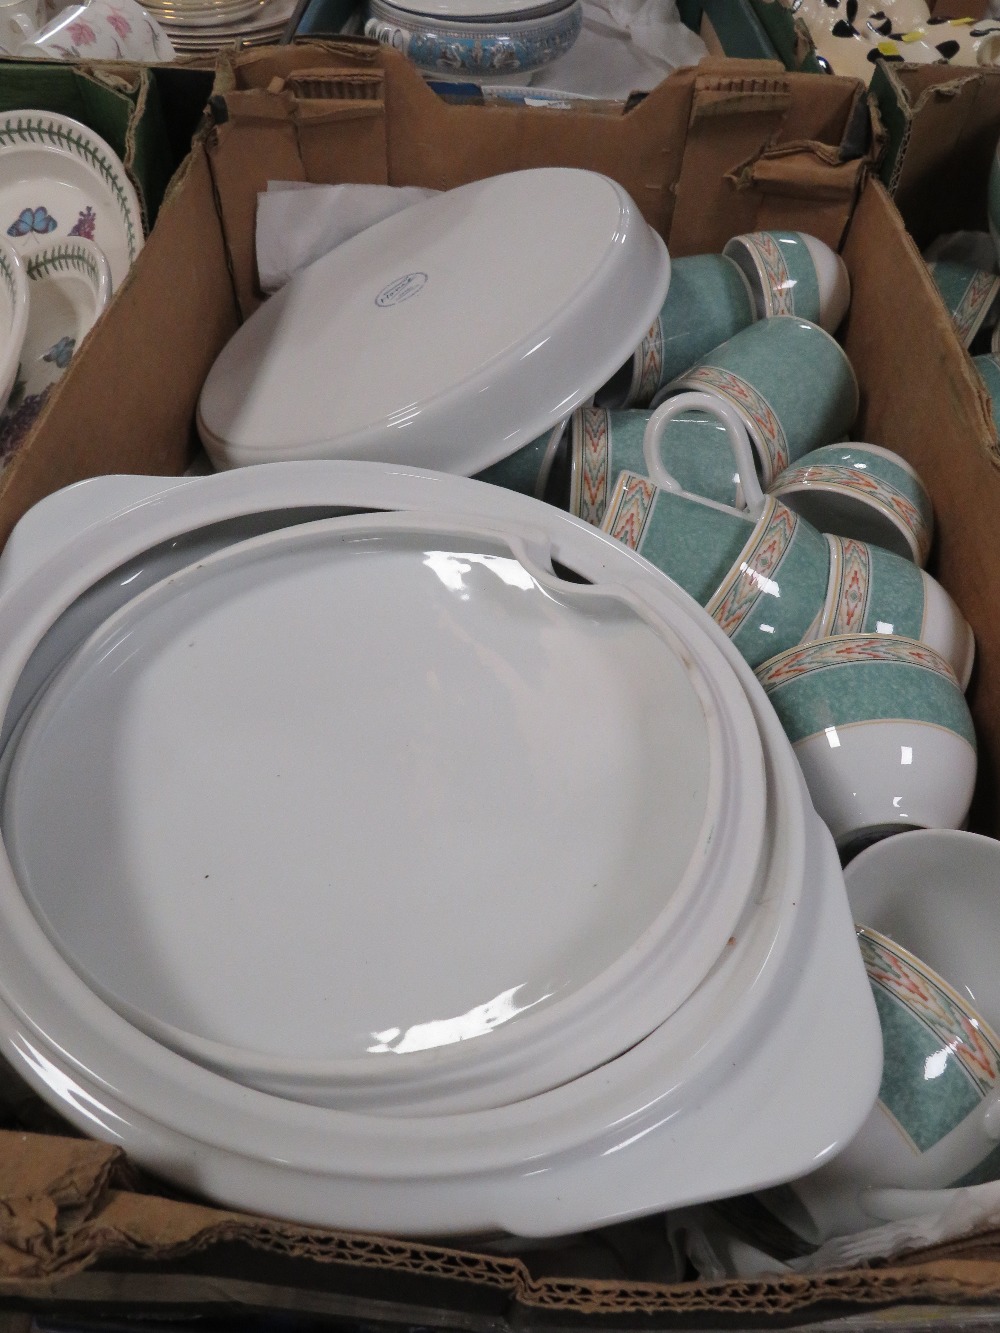 TWO TRAYS OF WEDGWOOD AZTEC DINNER WARE - Image 3 of 4